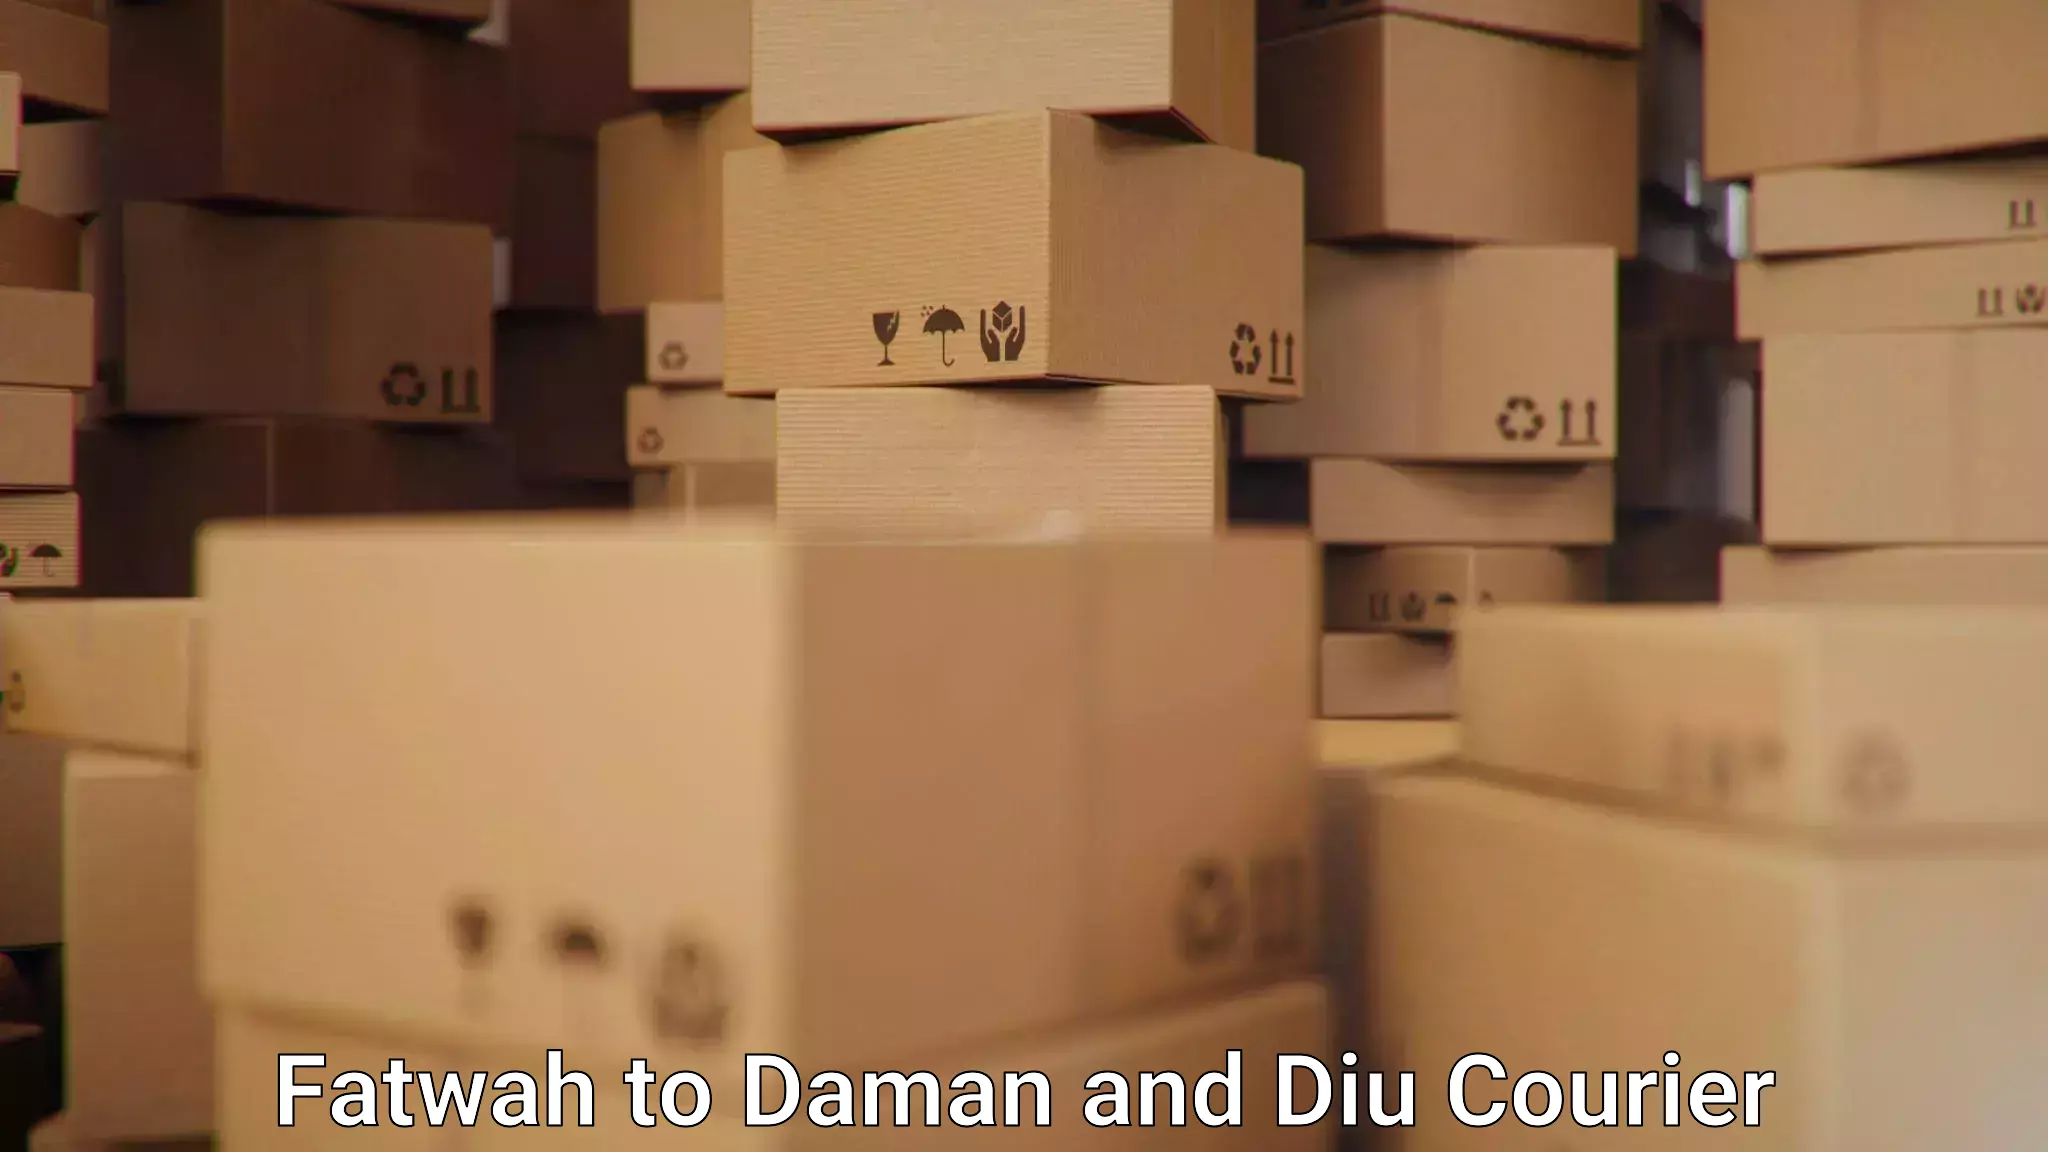 Courier service innovation Fatwah to Diu